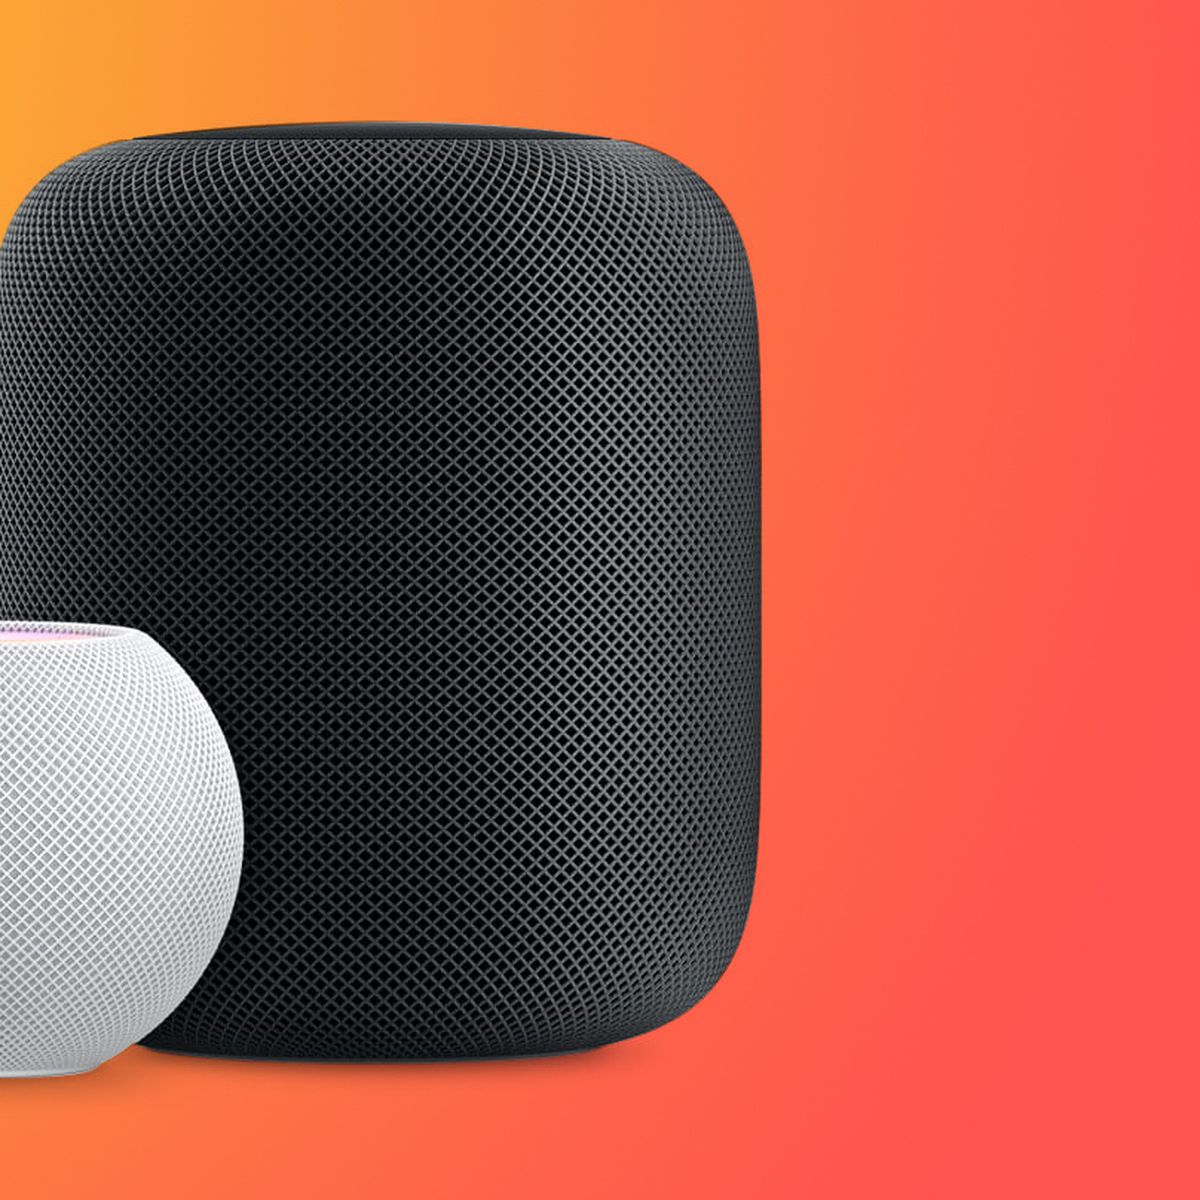 HomePod adds new features and Siri languages - Apple